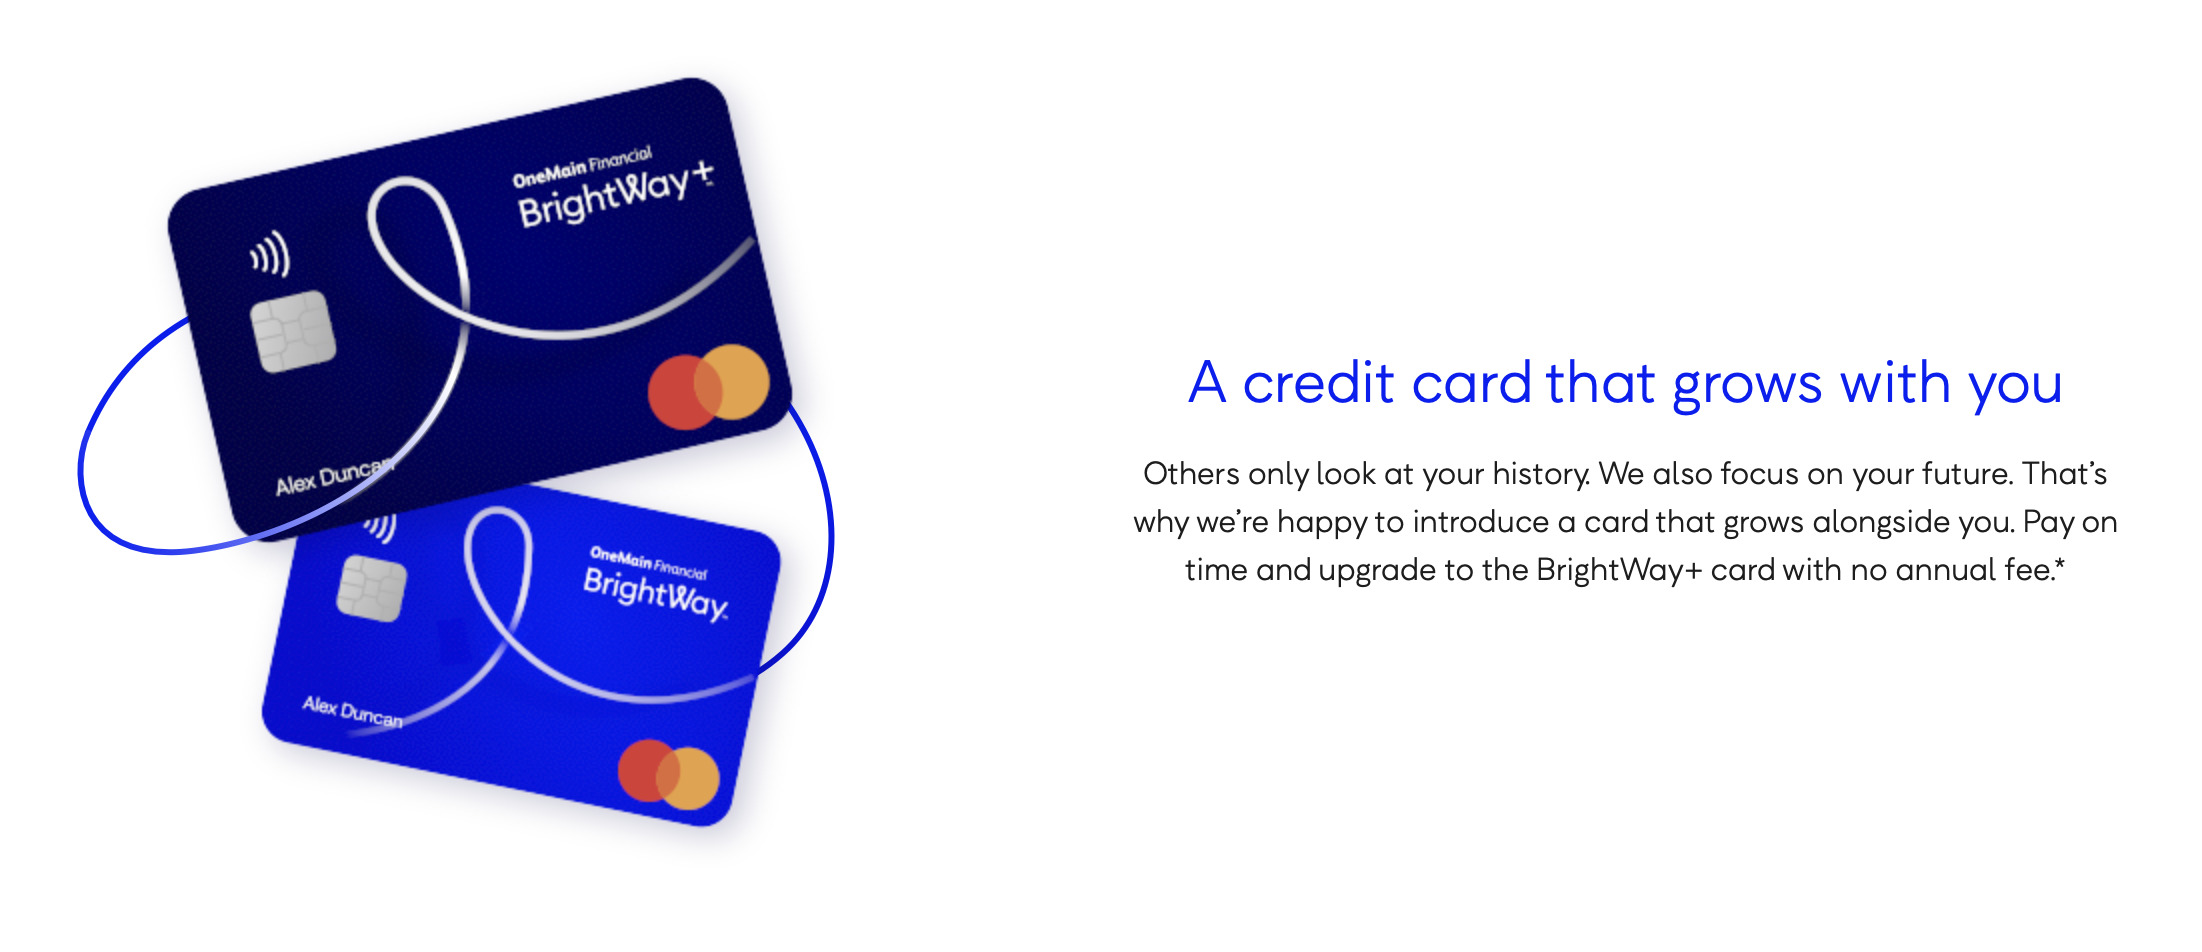 Credit card design and message